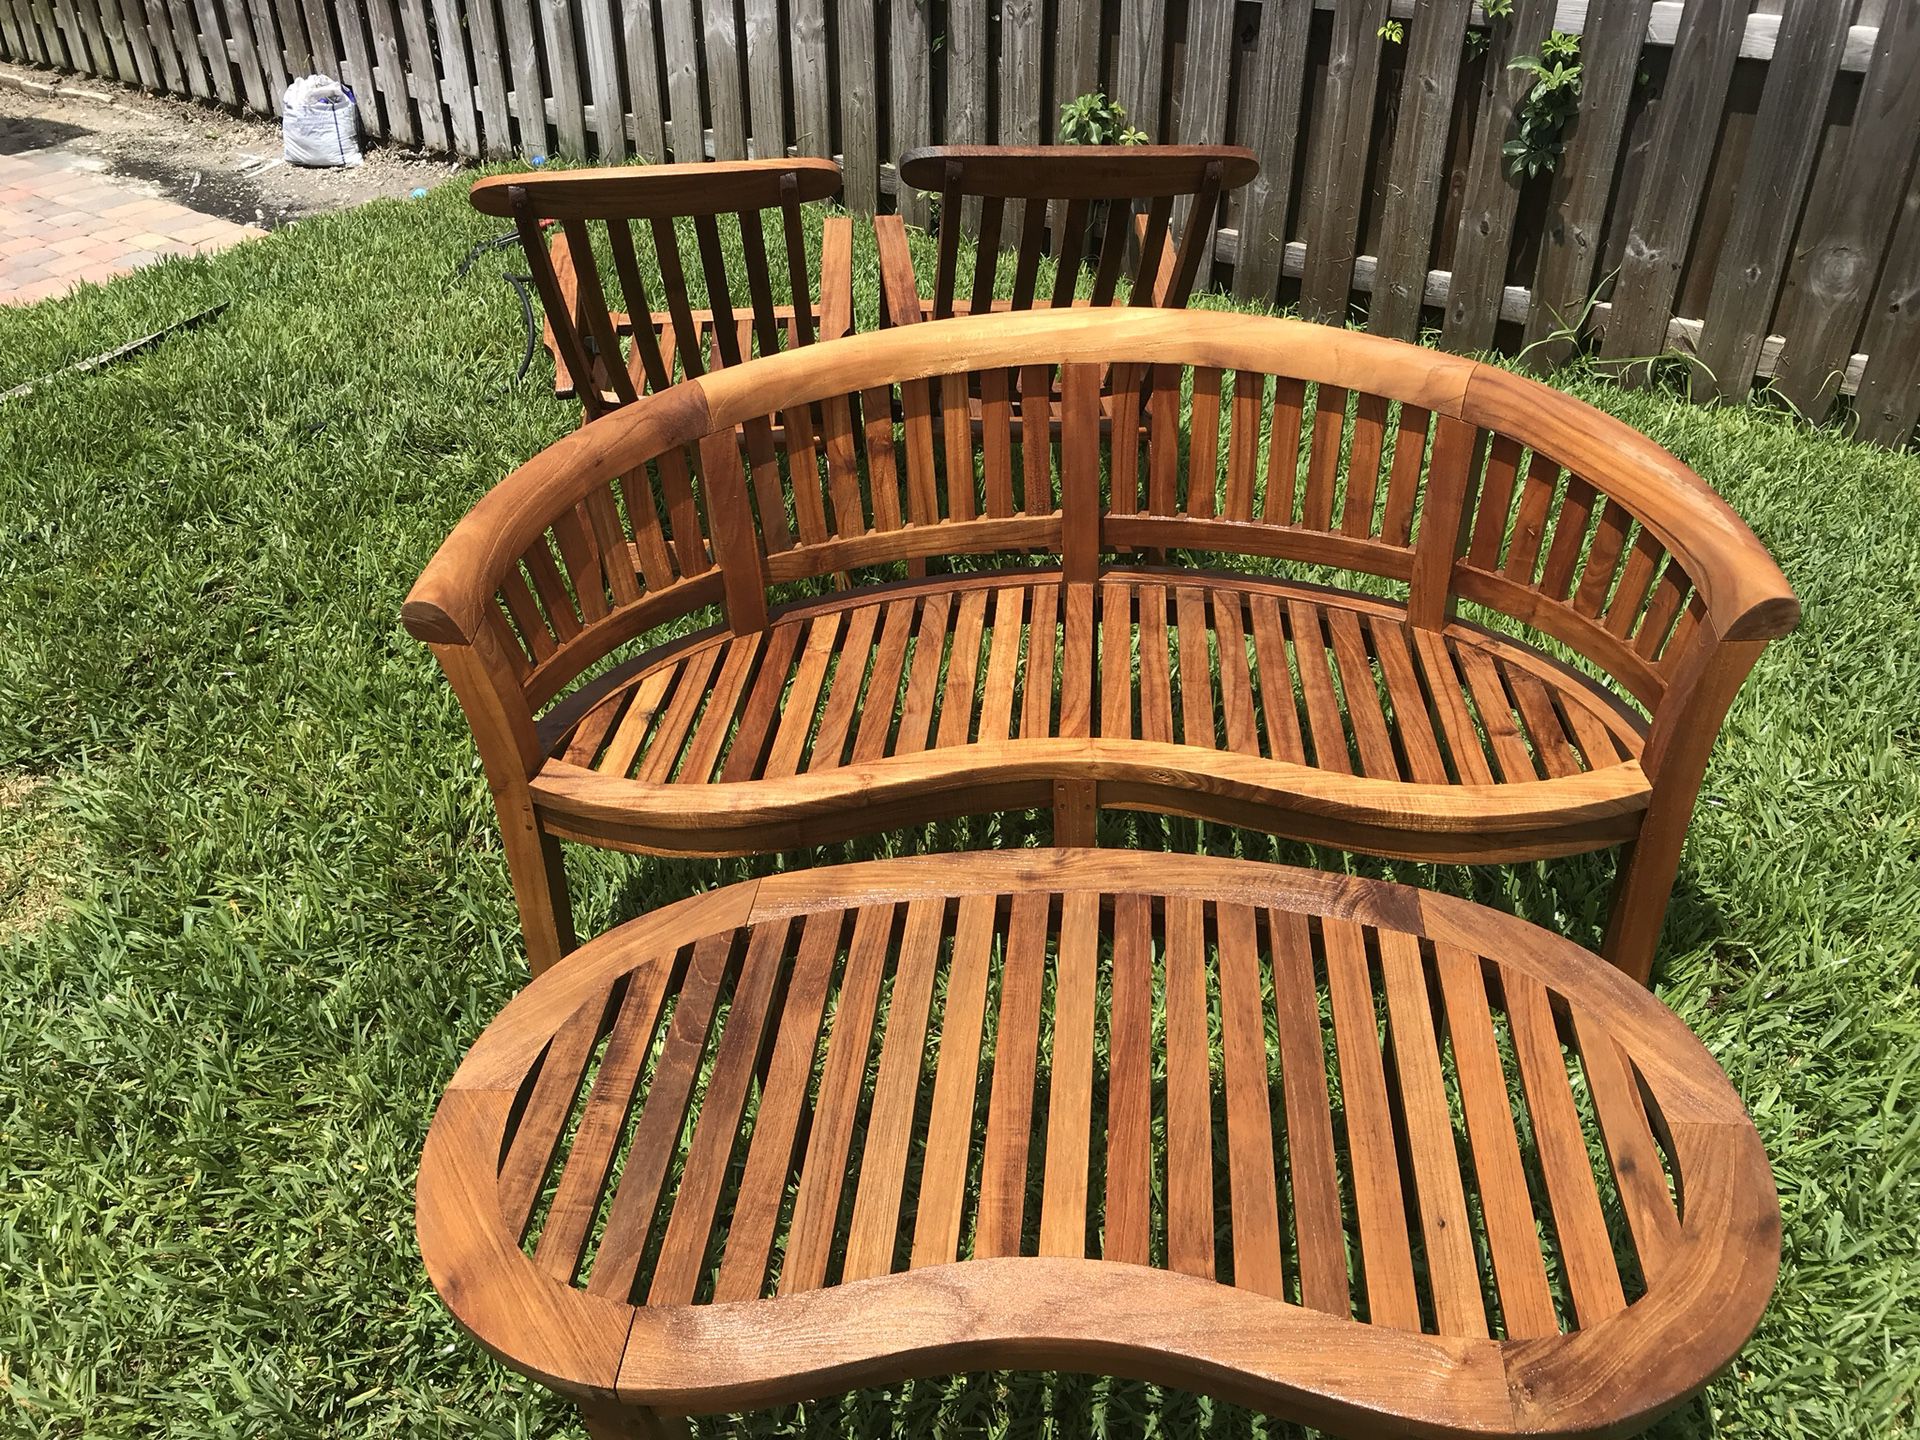 Teak Patio Furniture set (4 chairs, bench and table)